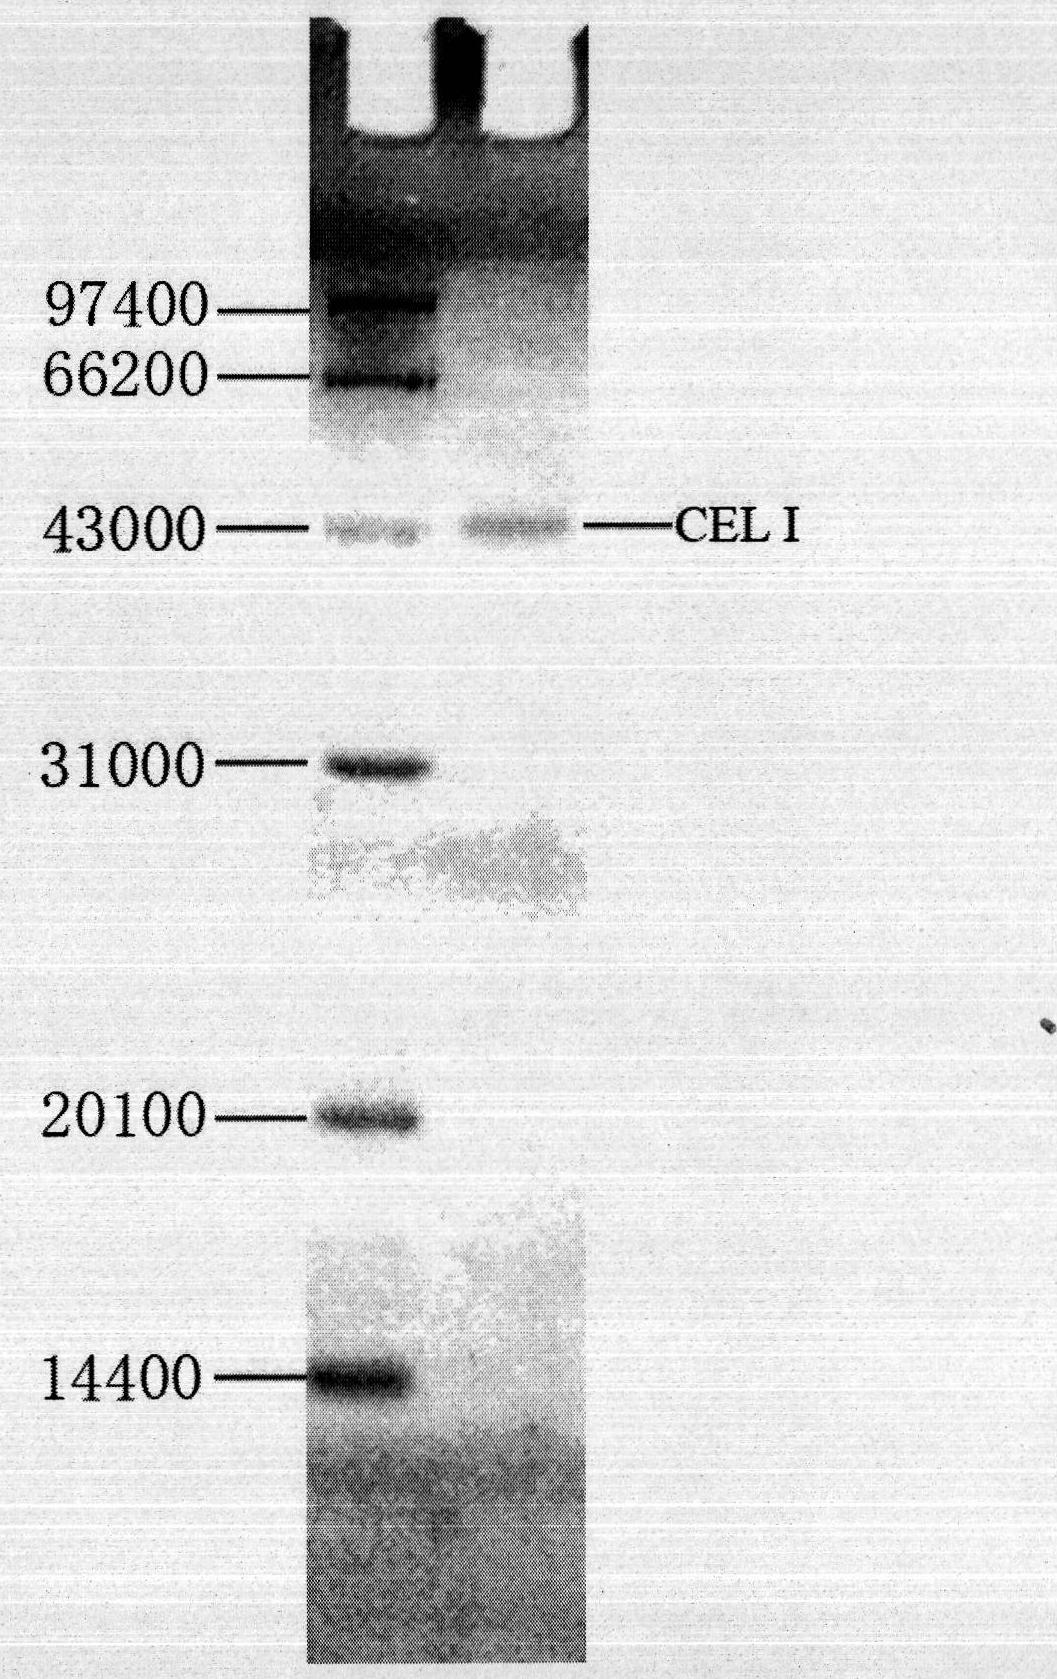 Method for extracting CEL I nuclease in celery